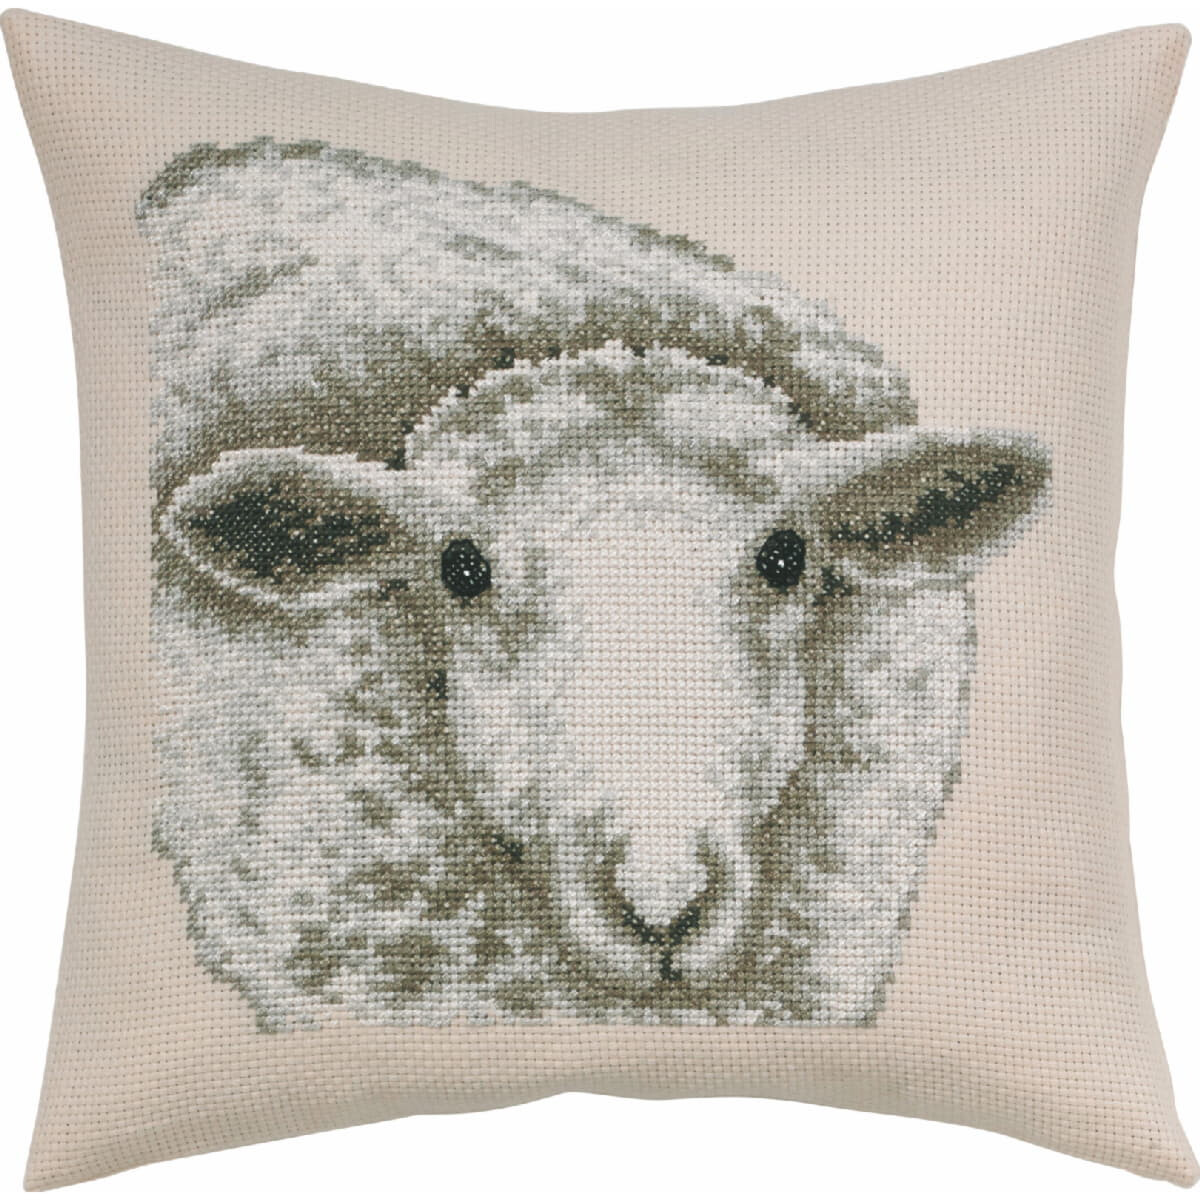 Permin cushion counted cross stitch kit "White...